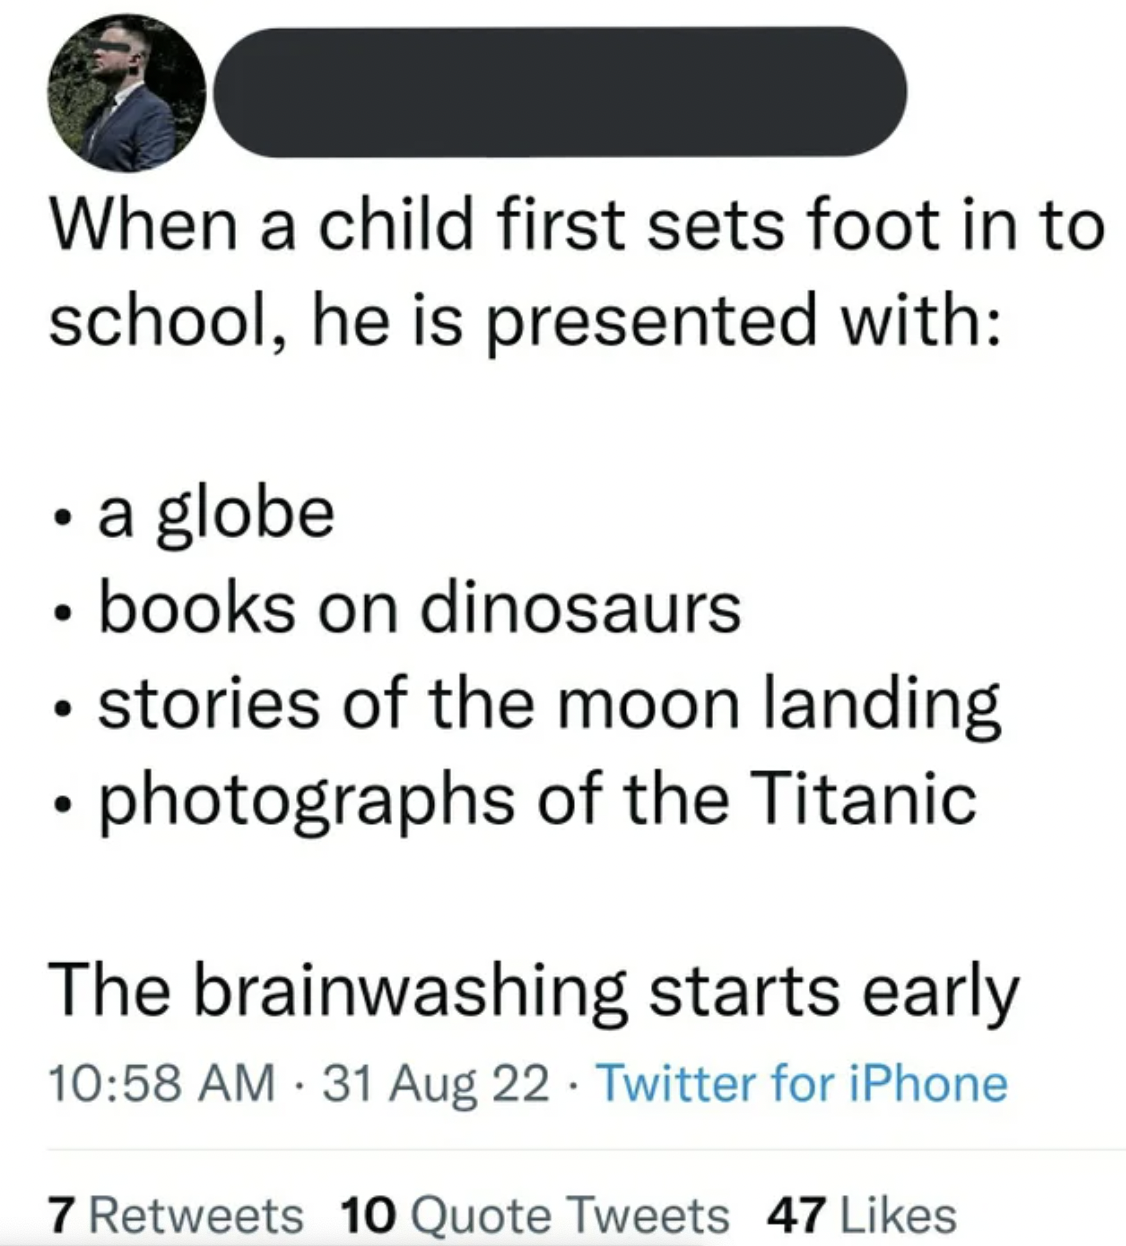 Confidently Incorrect - paper - When a child first sets foot in to school, he is presented with a globe books on dinosaurs stories of the moon landing photographs of the Titanic The brainwashing starts early